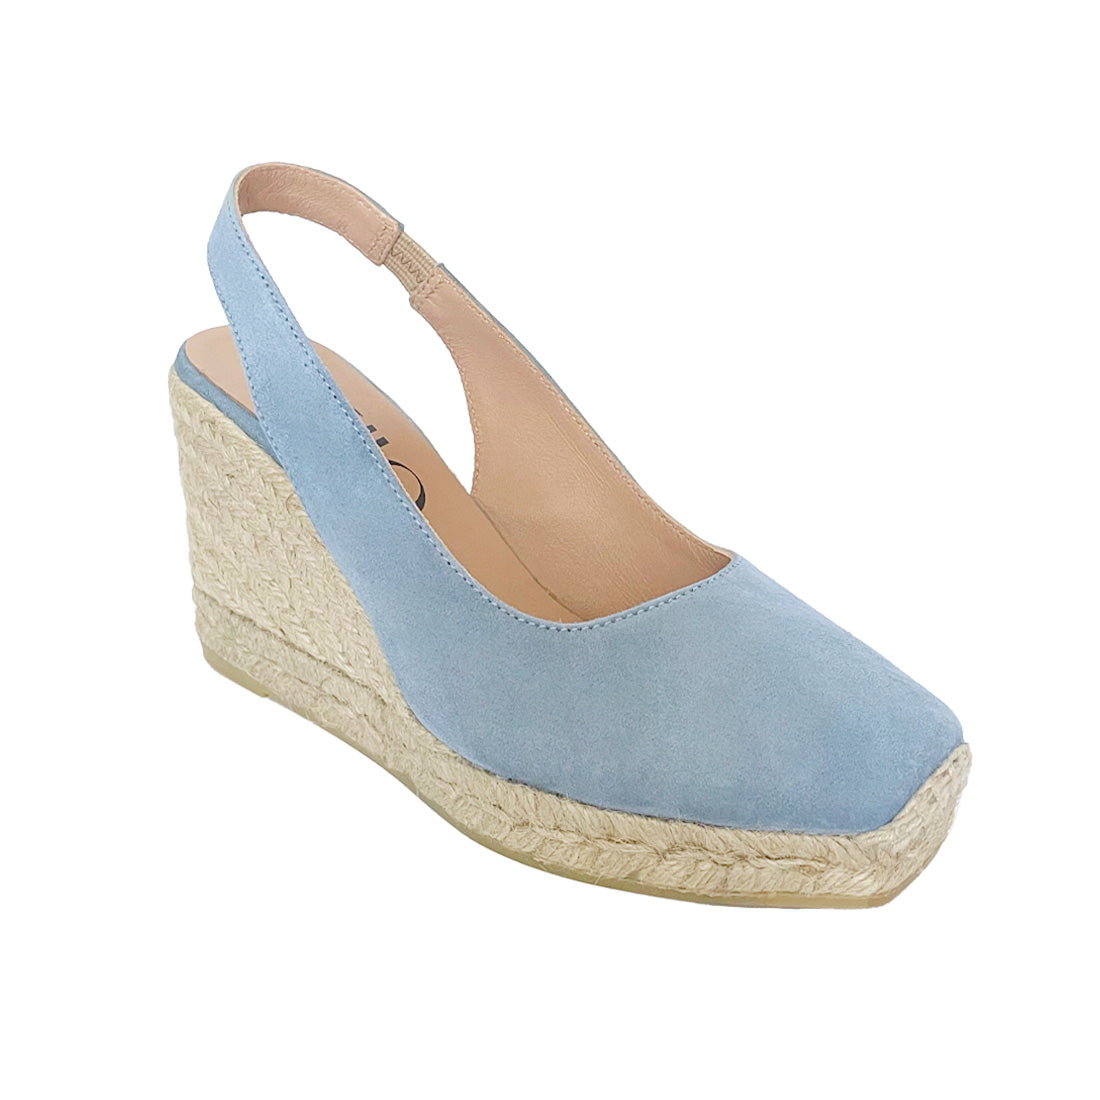 Light Blue espadrilles wedges handcrafted comfortable shoes